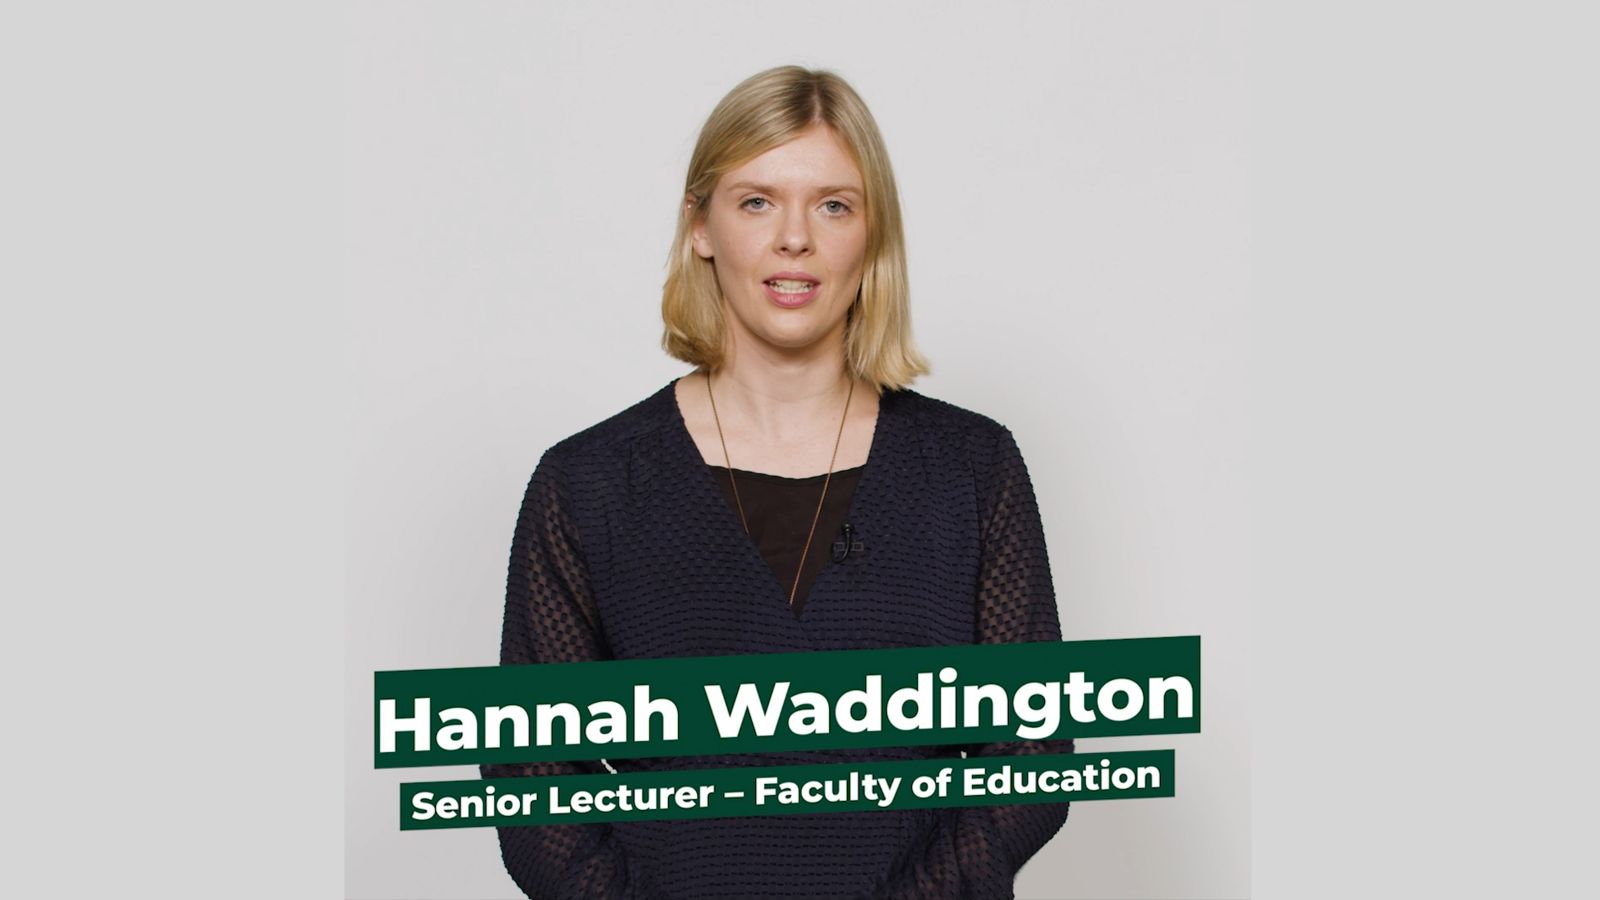 Senior Lecturer Hannah Waddington stands facing the camera against a white background